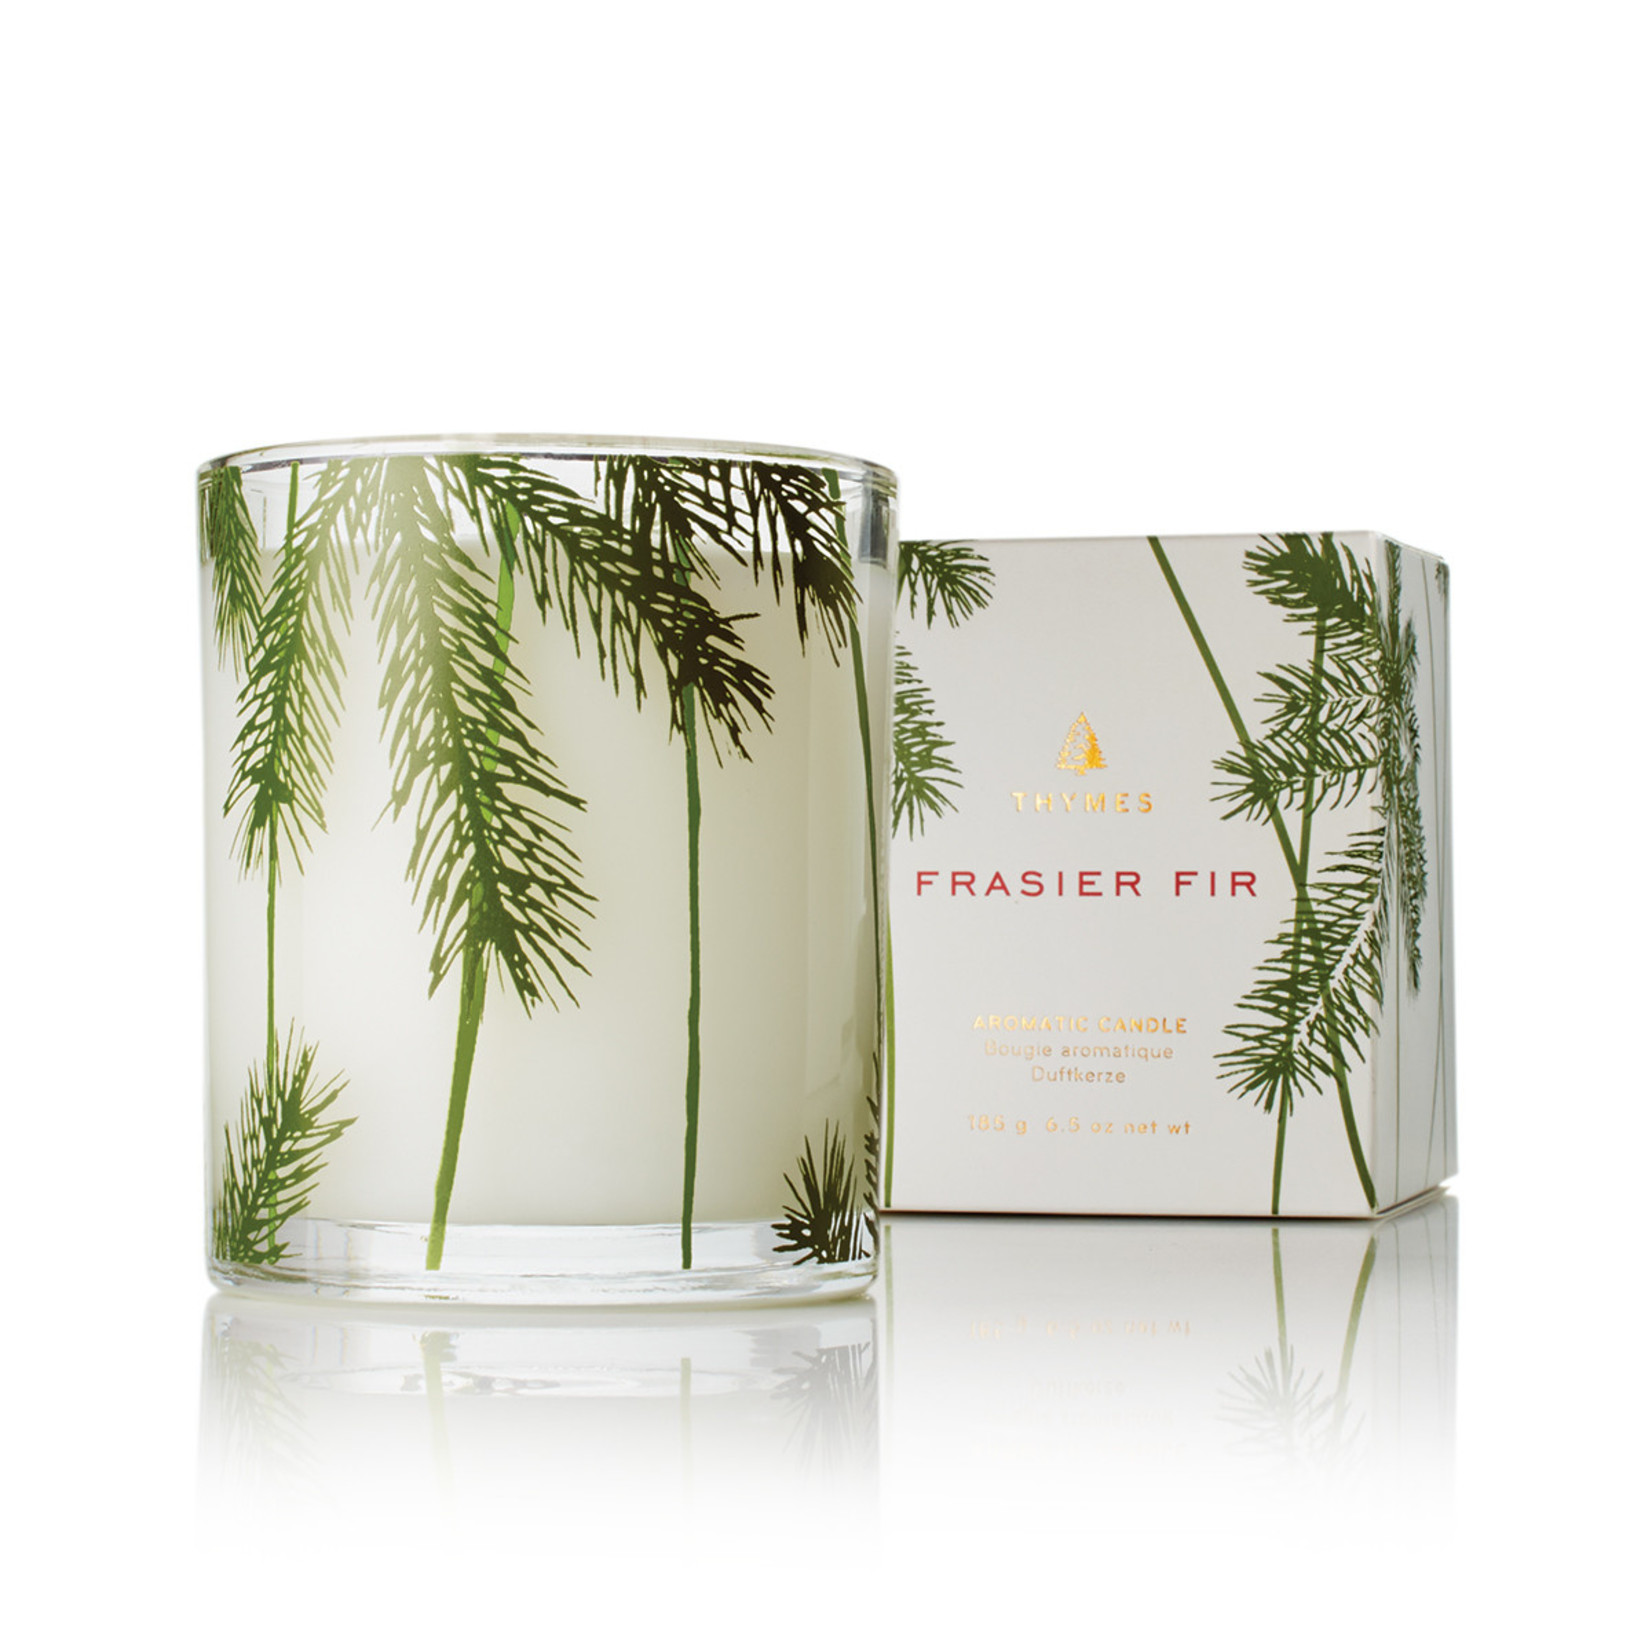 The Thymes Frasier Fir Poured Candle, Pine Needle Design